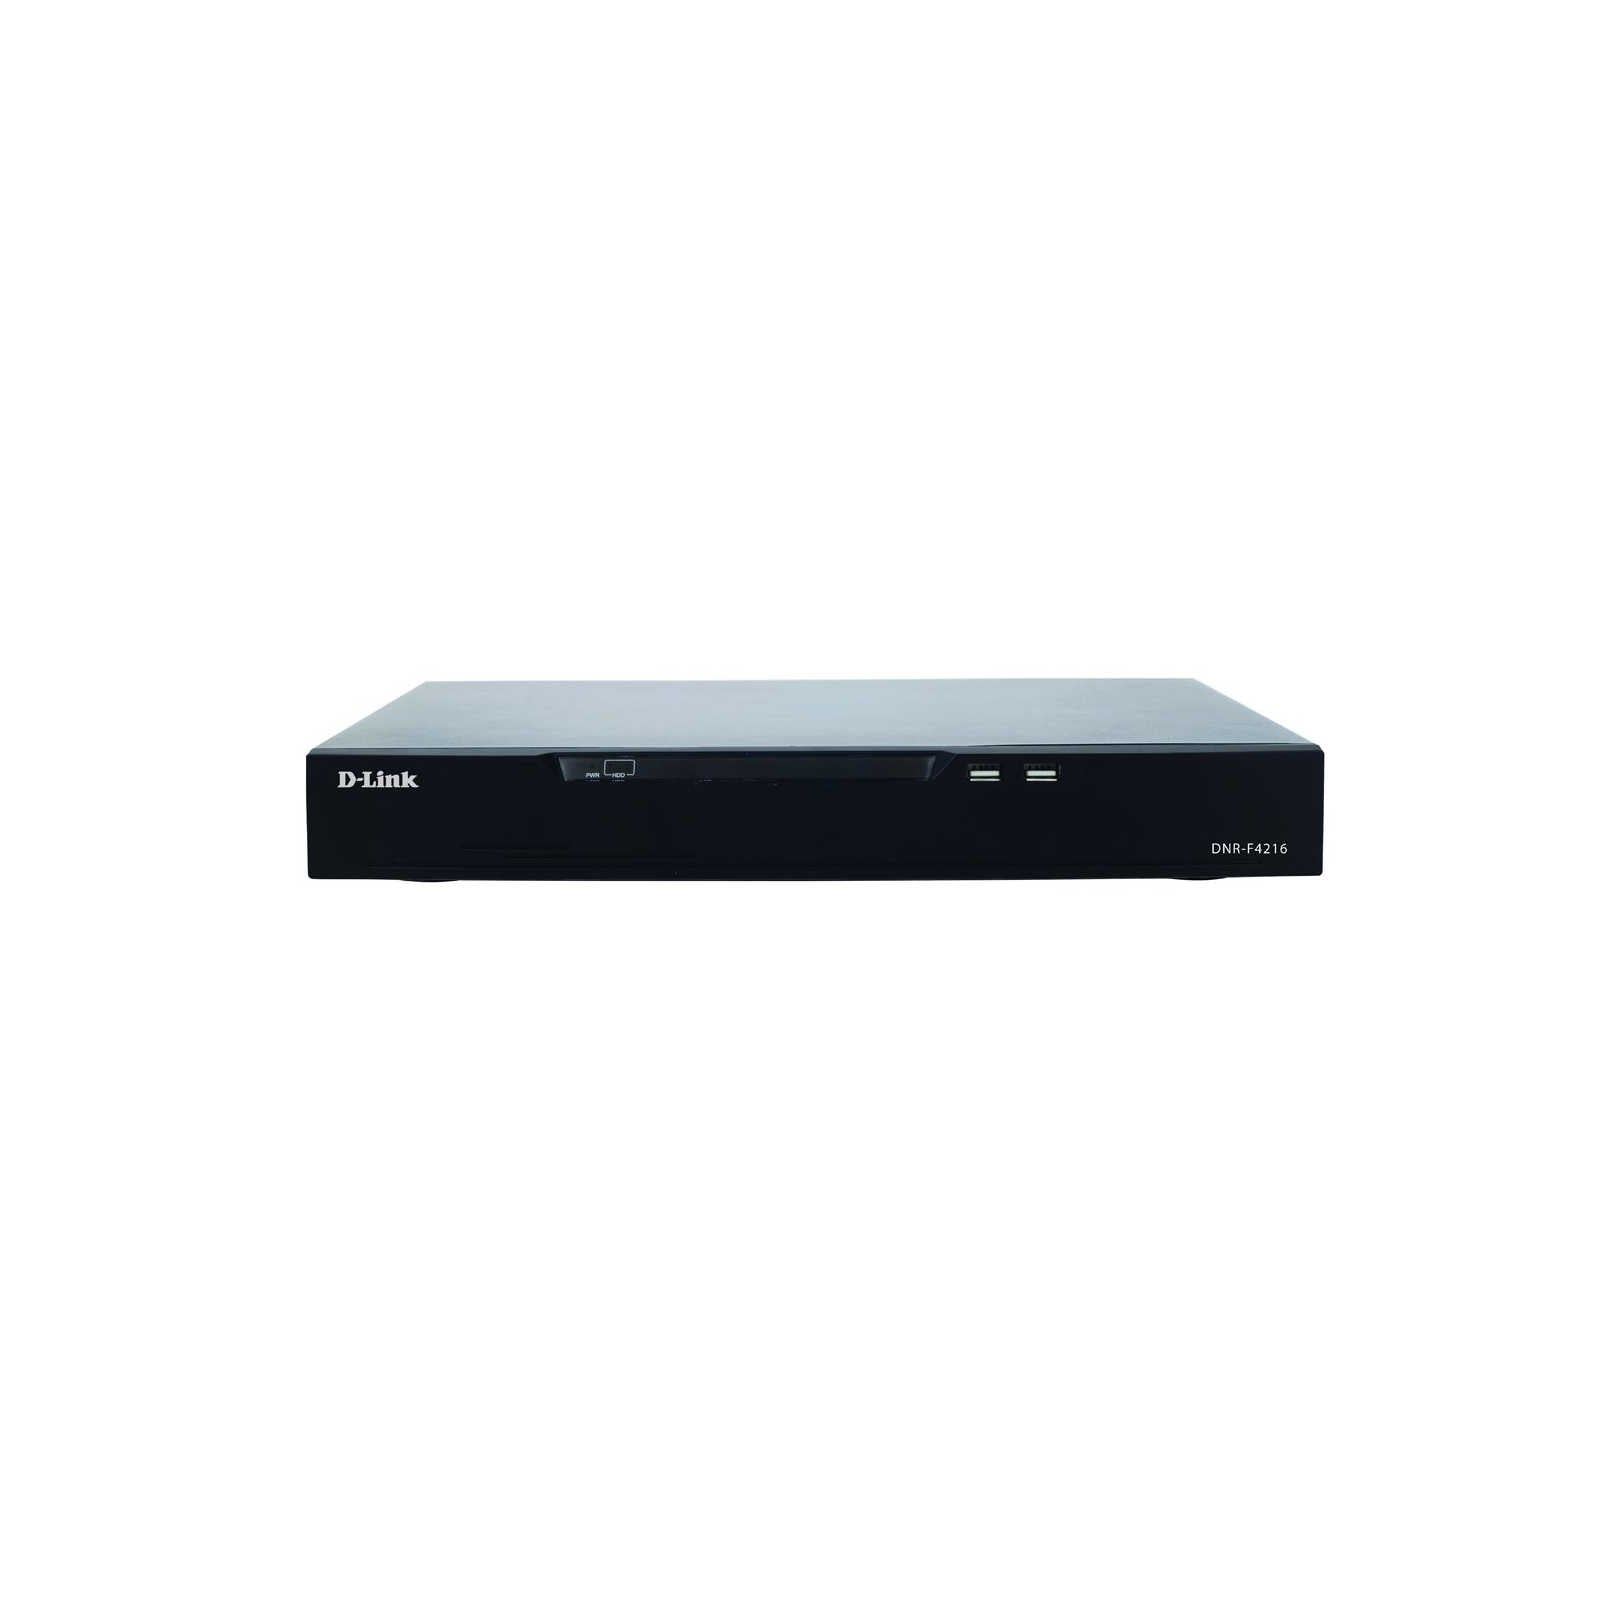 D-Link DNR-F4216 16 Ch Professional Network Video Recorder (NVR) - Ooberpad